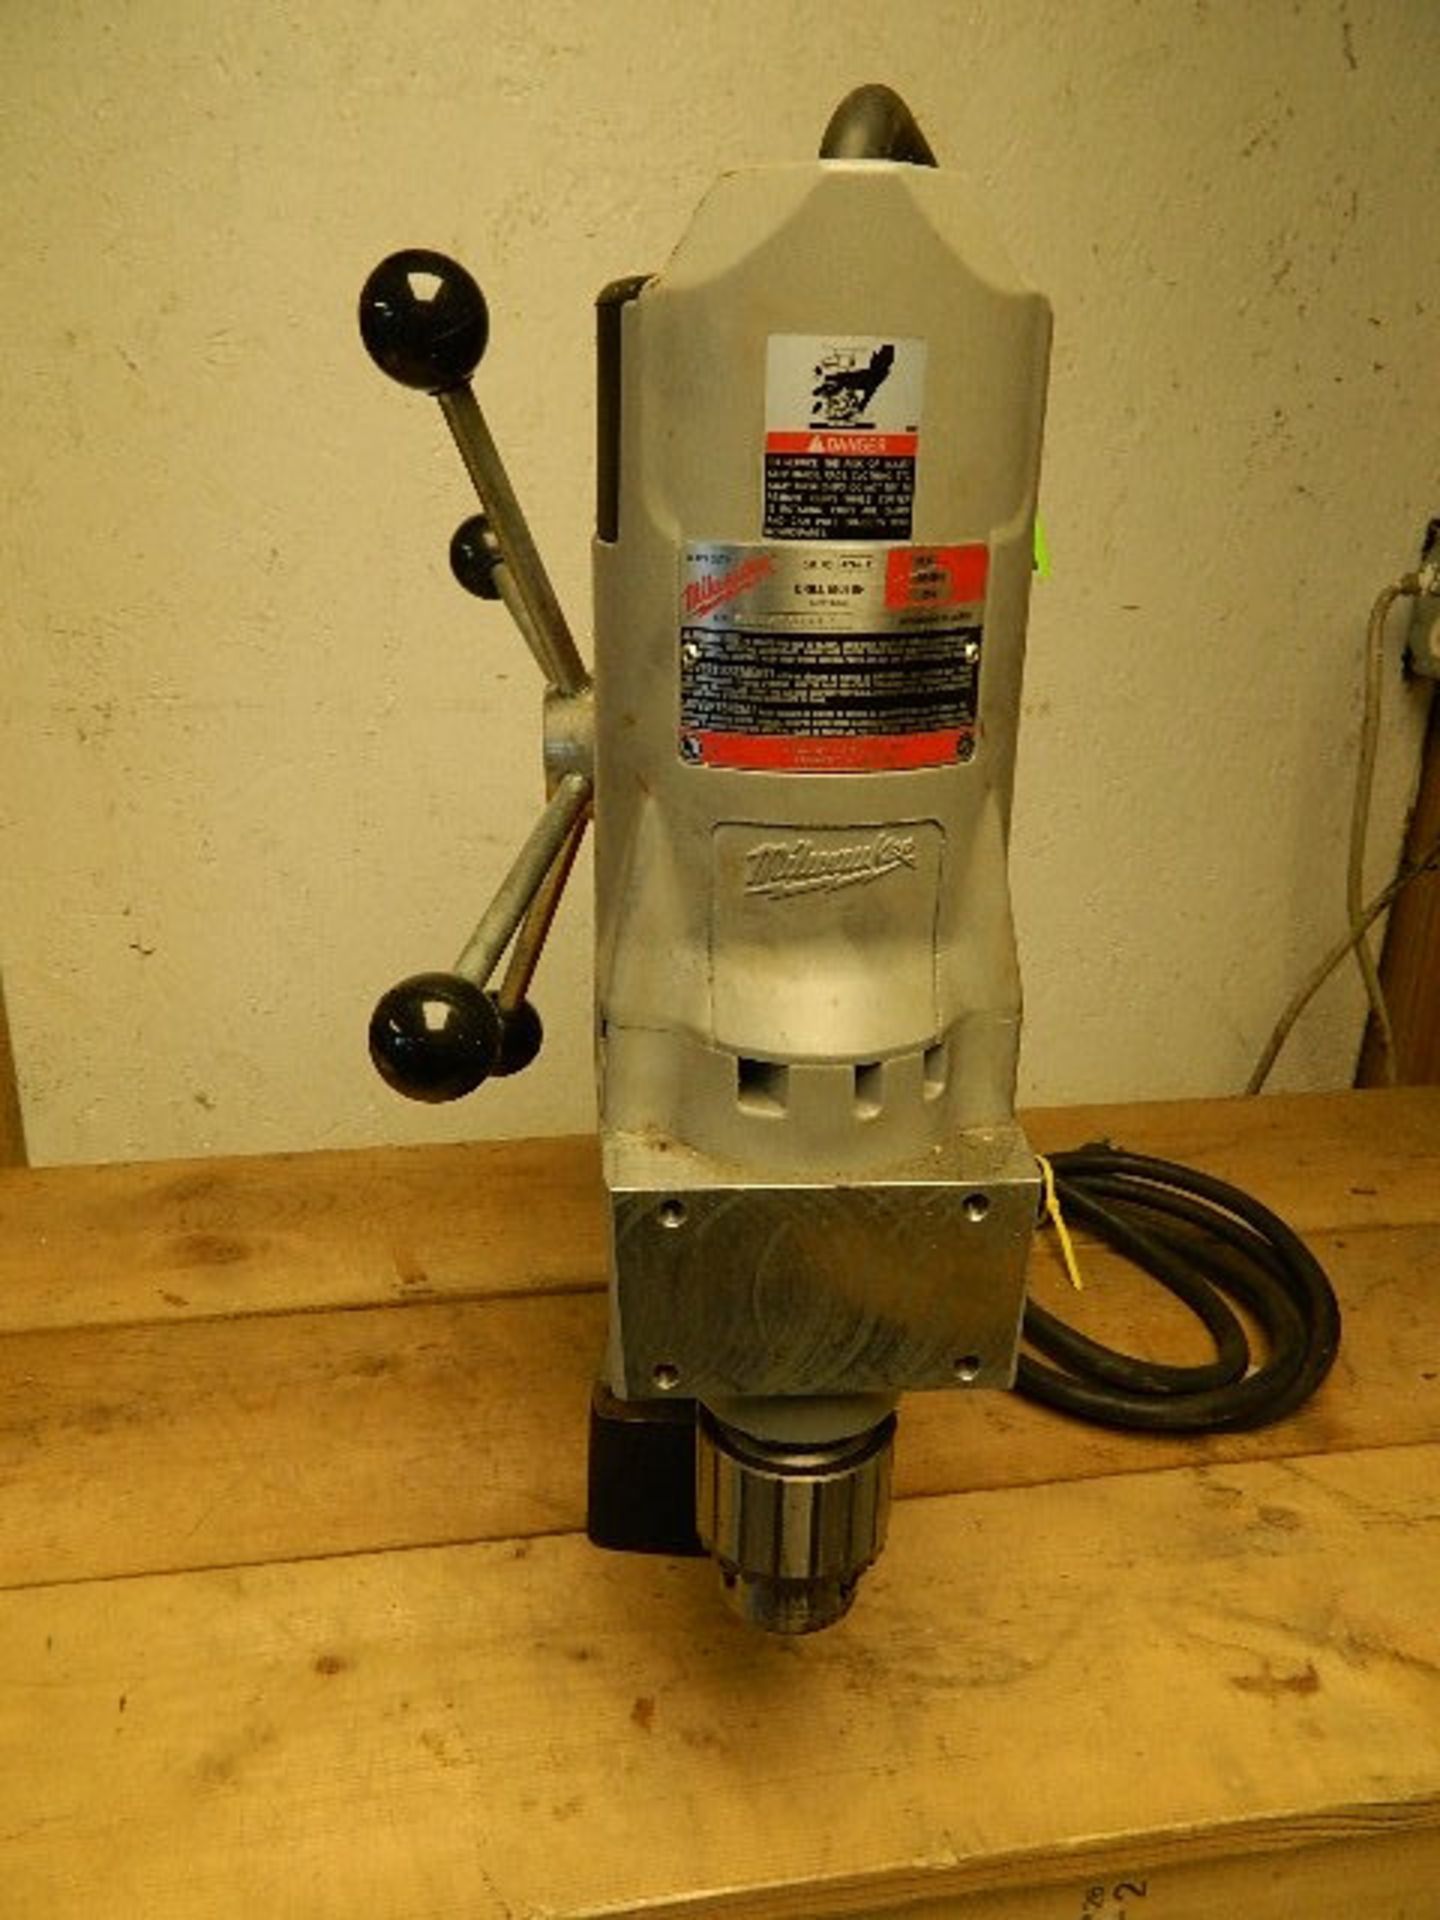 Milwaukee Electromagnetic Drill Press, CAT #4203, 11.5 A. Drill Motor 115V. (Note: Does not work has - Image 2 of 7